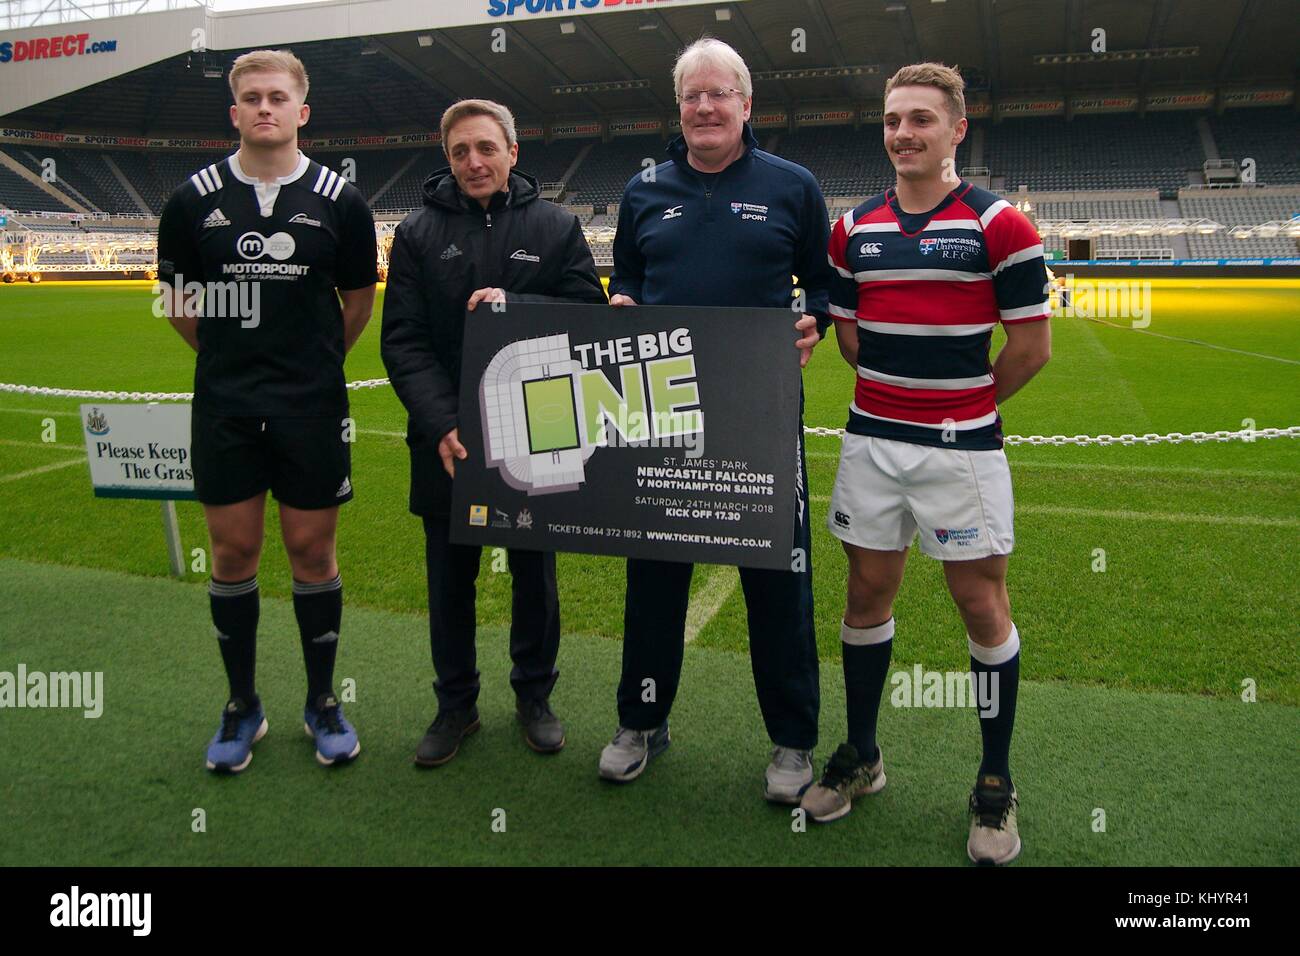 Newcastle upon Tyne, England, 21 November 2017 Olli Robinson, Colin Stromsoy Northumbria University, Matthew Carter, Daniel Nutton, Newcastle University, pitch side at St James Park during the press conference to announce The Big One, a day of rugby featuring Northumbria University playing Newcastle University followed by Newcastle Falcons against Northampton Saints in the Aviva Premiership at St James Park in March 2018. Credit: Colin Edwards/Alamy Live News. Stock Photo